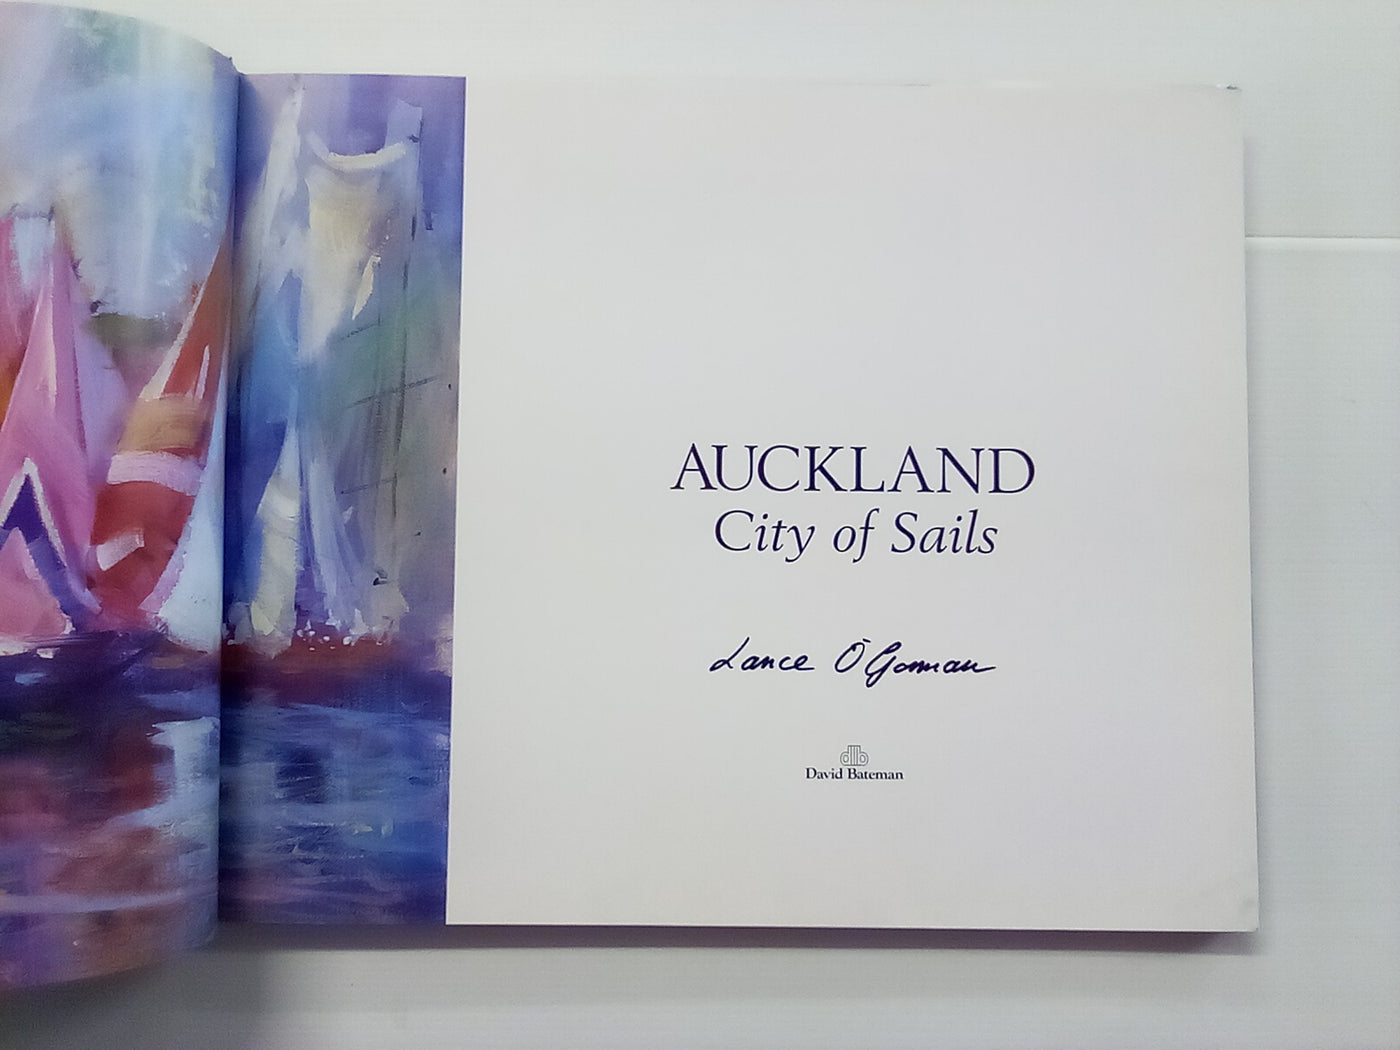 Auckland - City of Sails by Lance O'Gorman - Signed by Artist